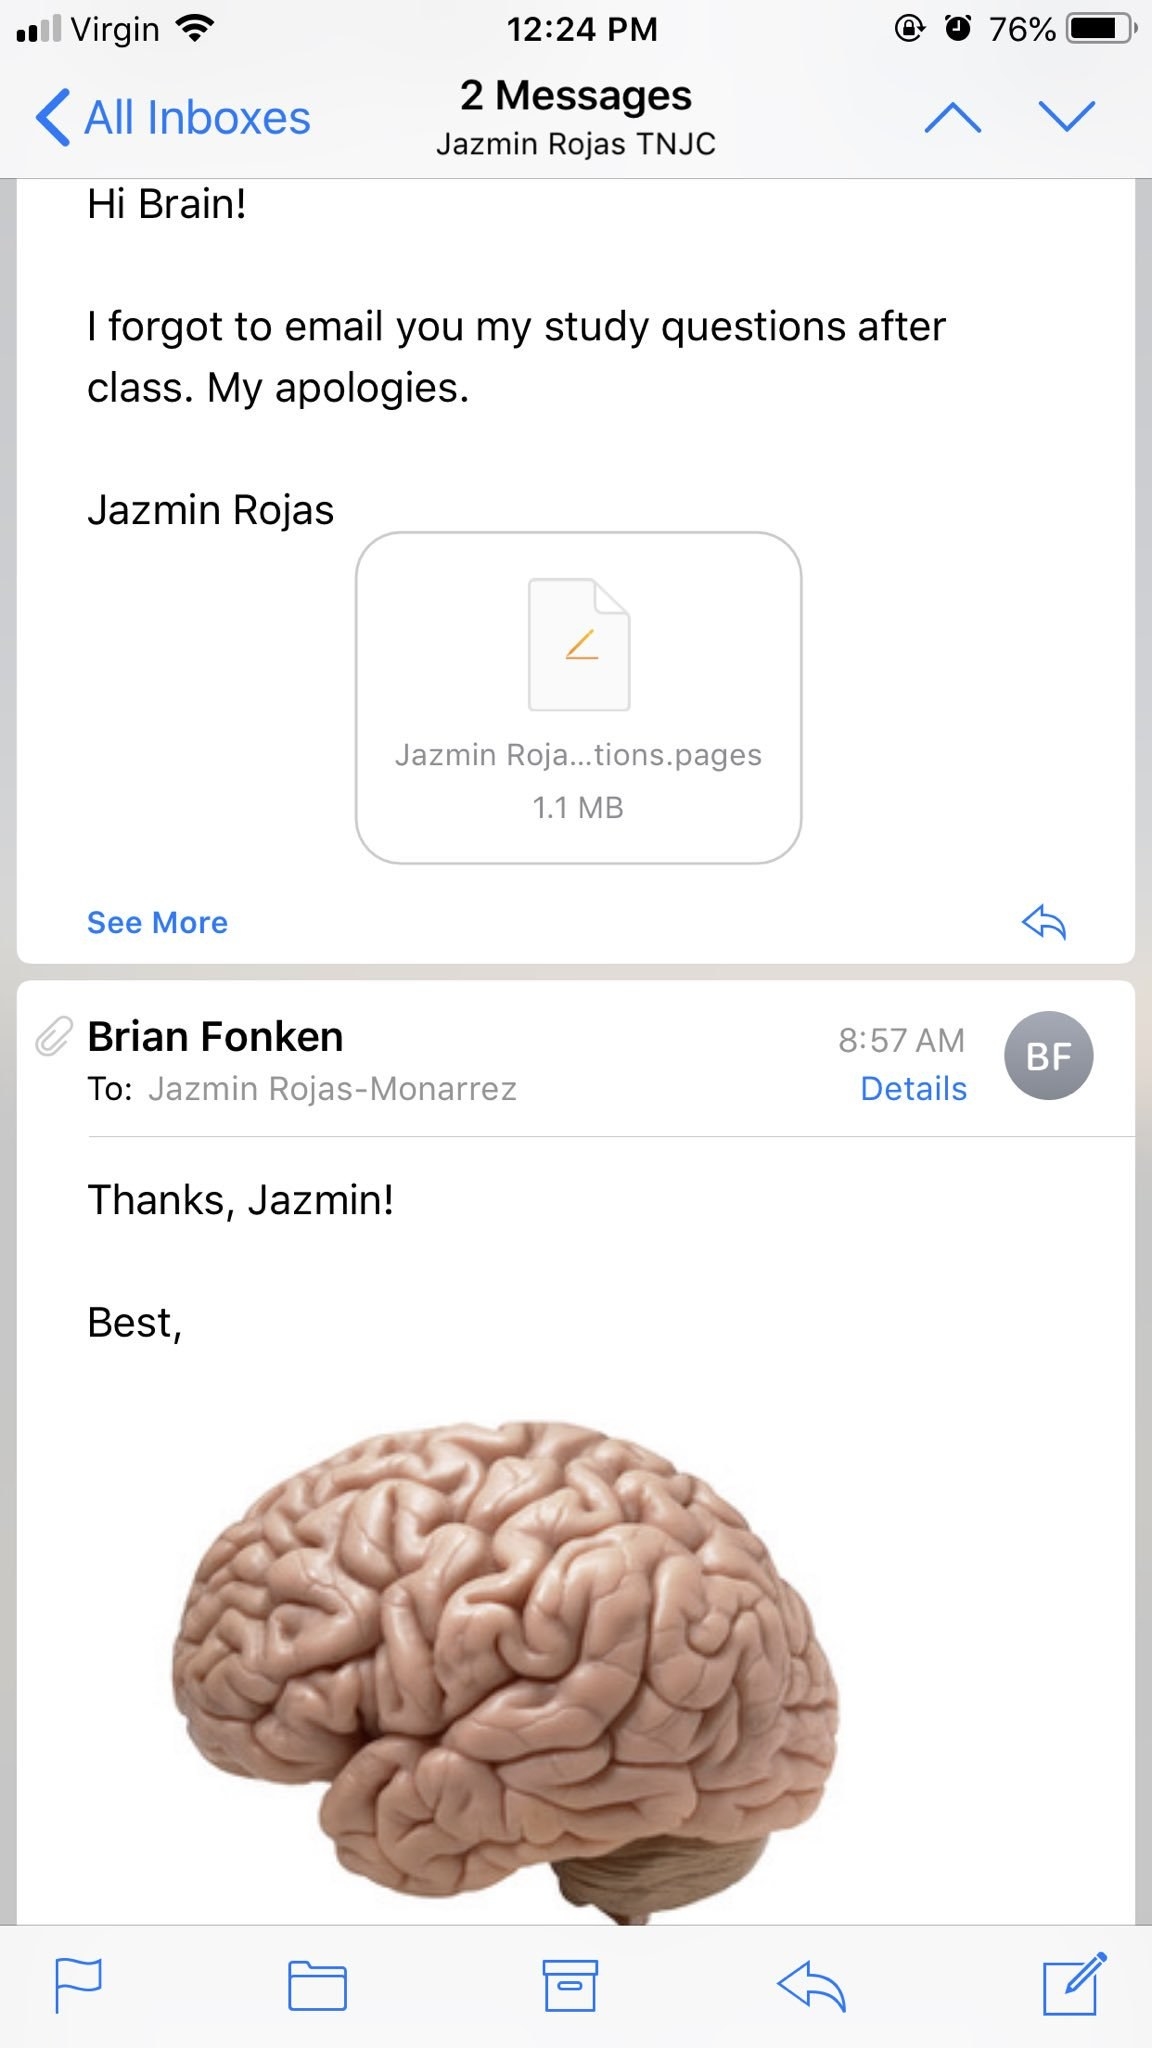 Professor named Brian signs off with the photo of a brain after his student addresses him as &quot;Brain&quot; in a text message